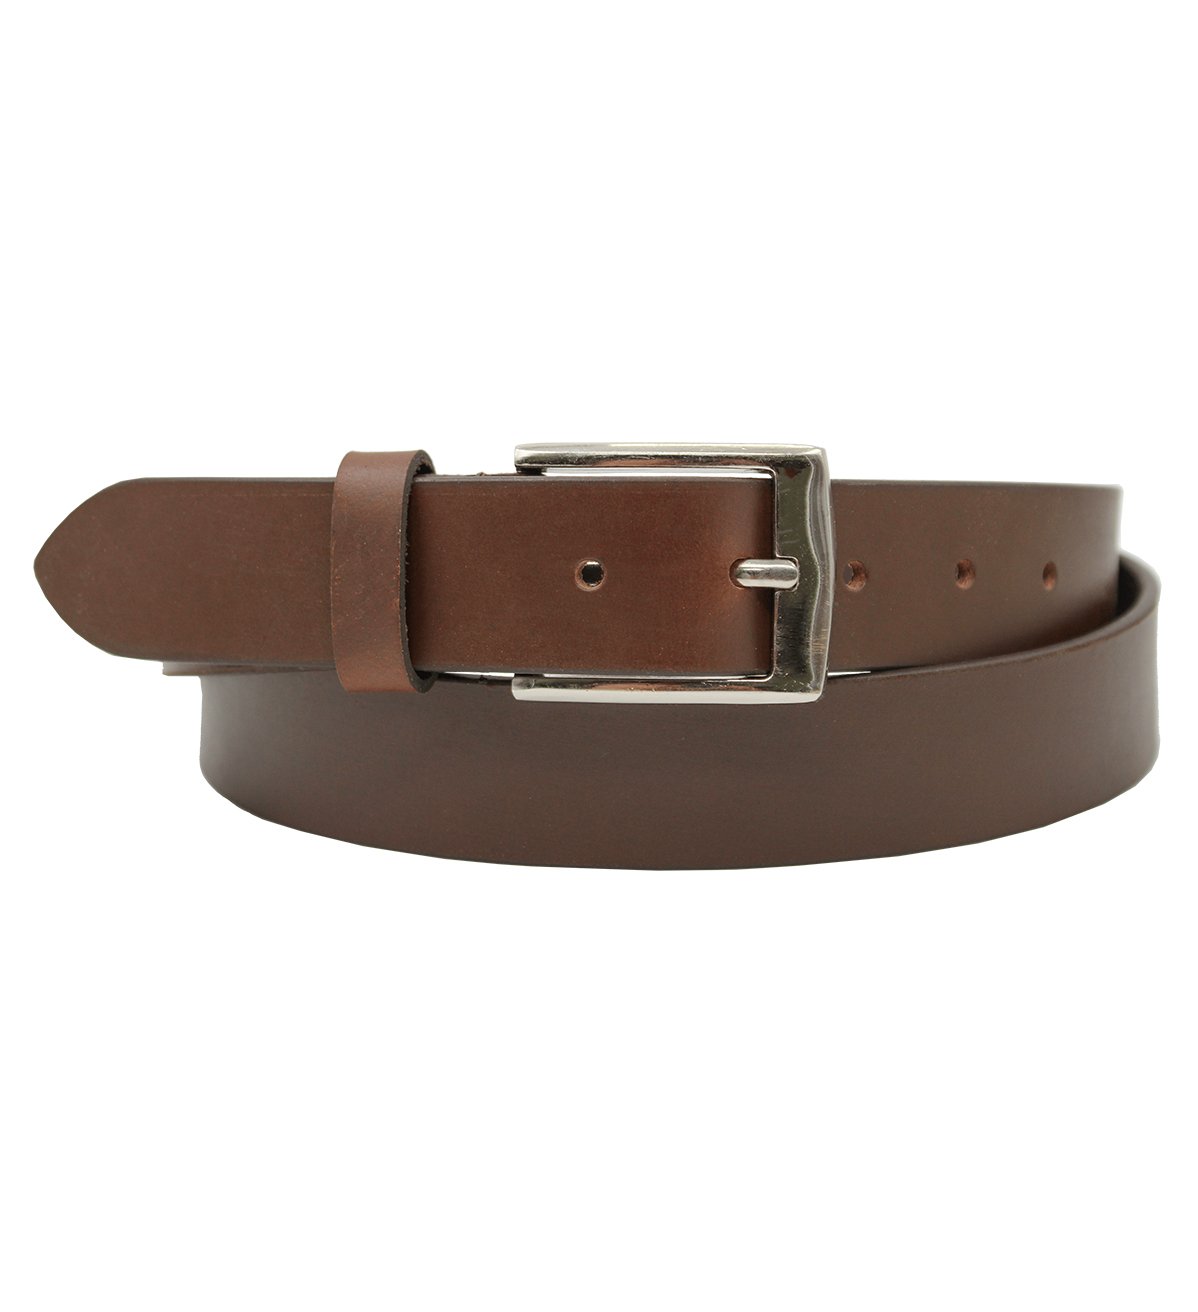 Men's Formal Leather Belt with Heavy Silver Buckle - #BT-1608-1